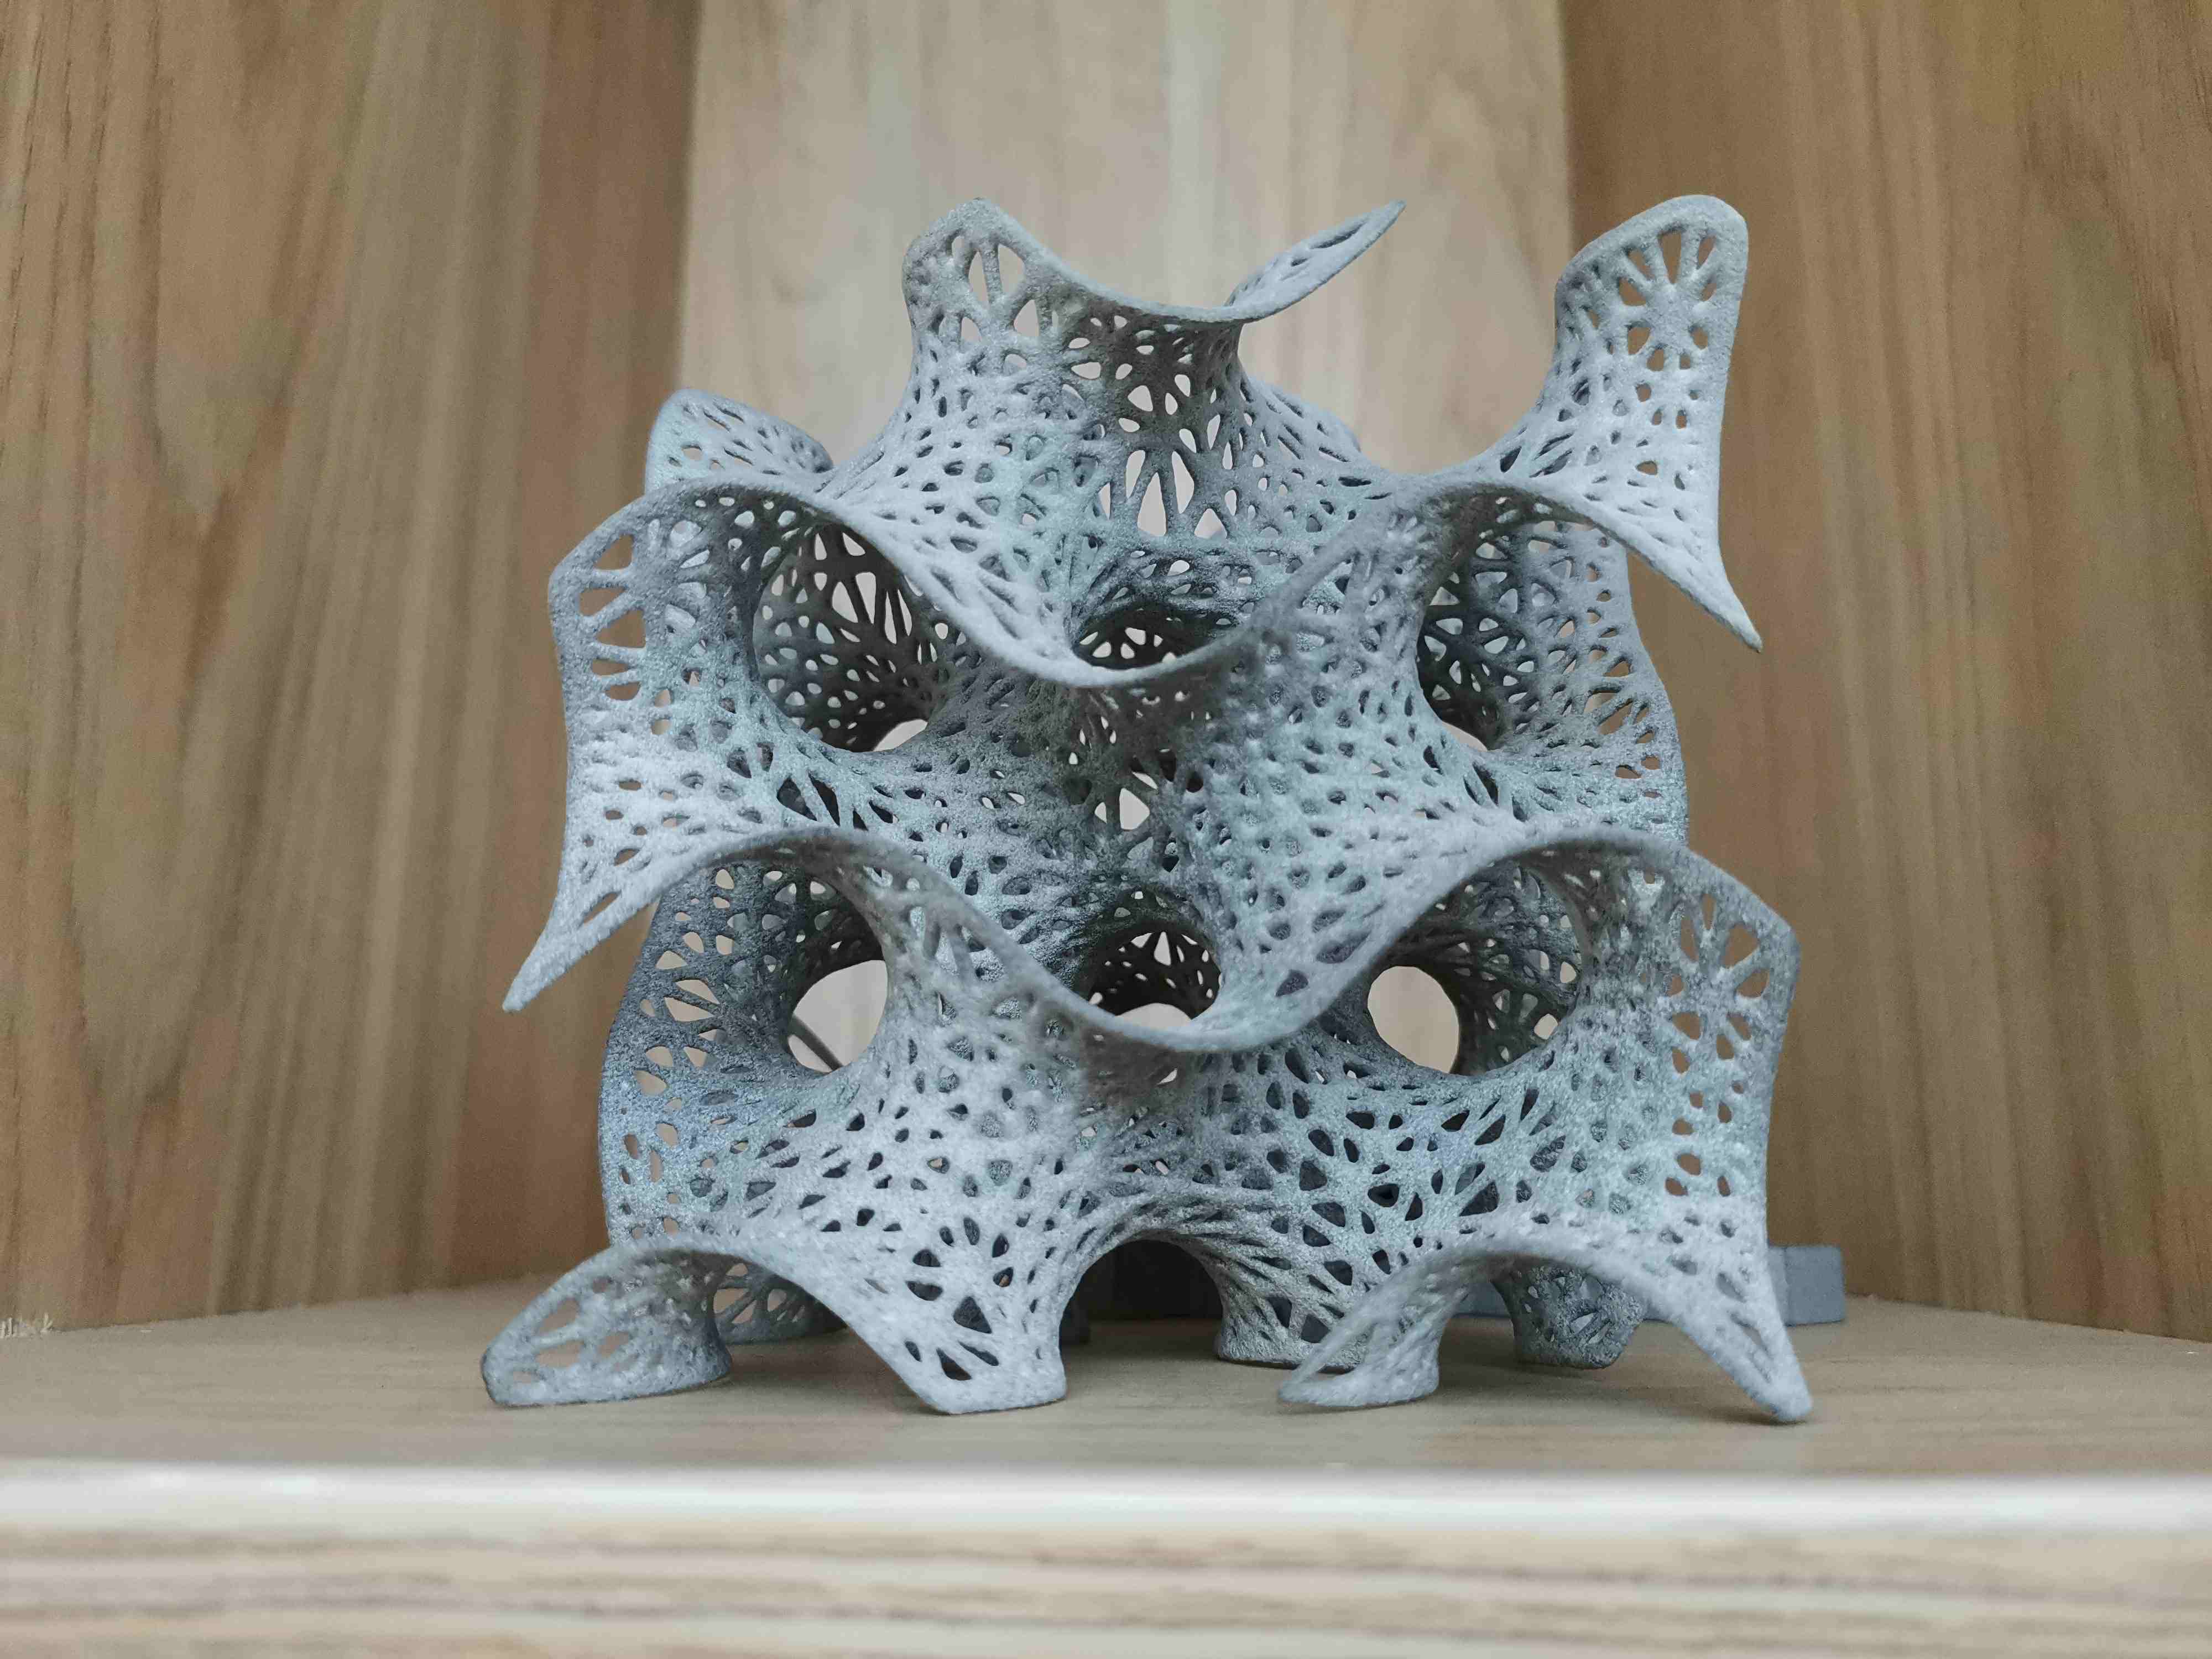 3D printing - the technology reshaping our future